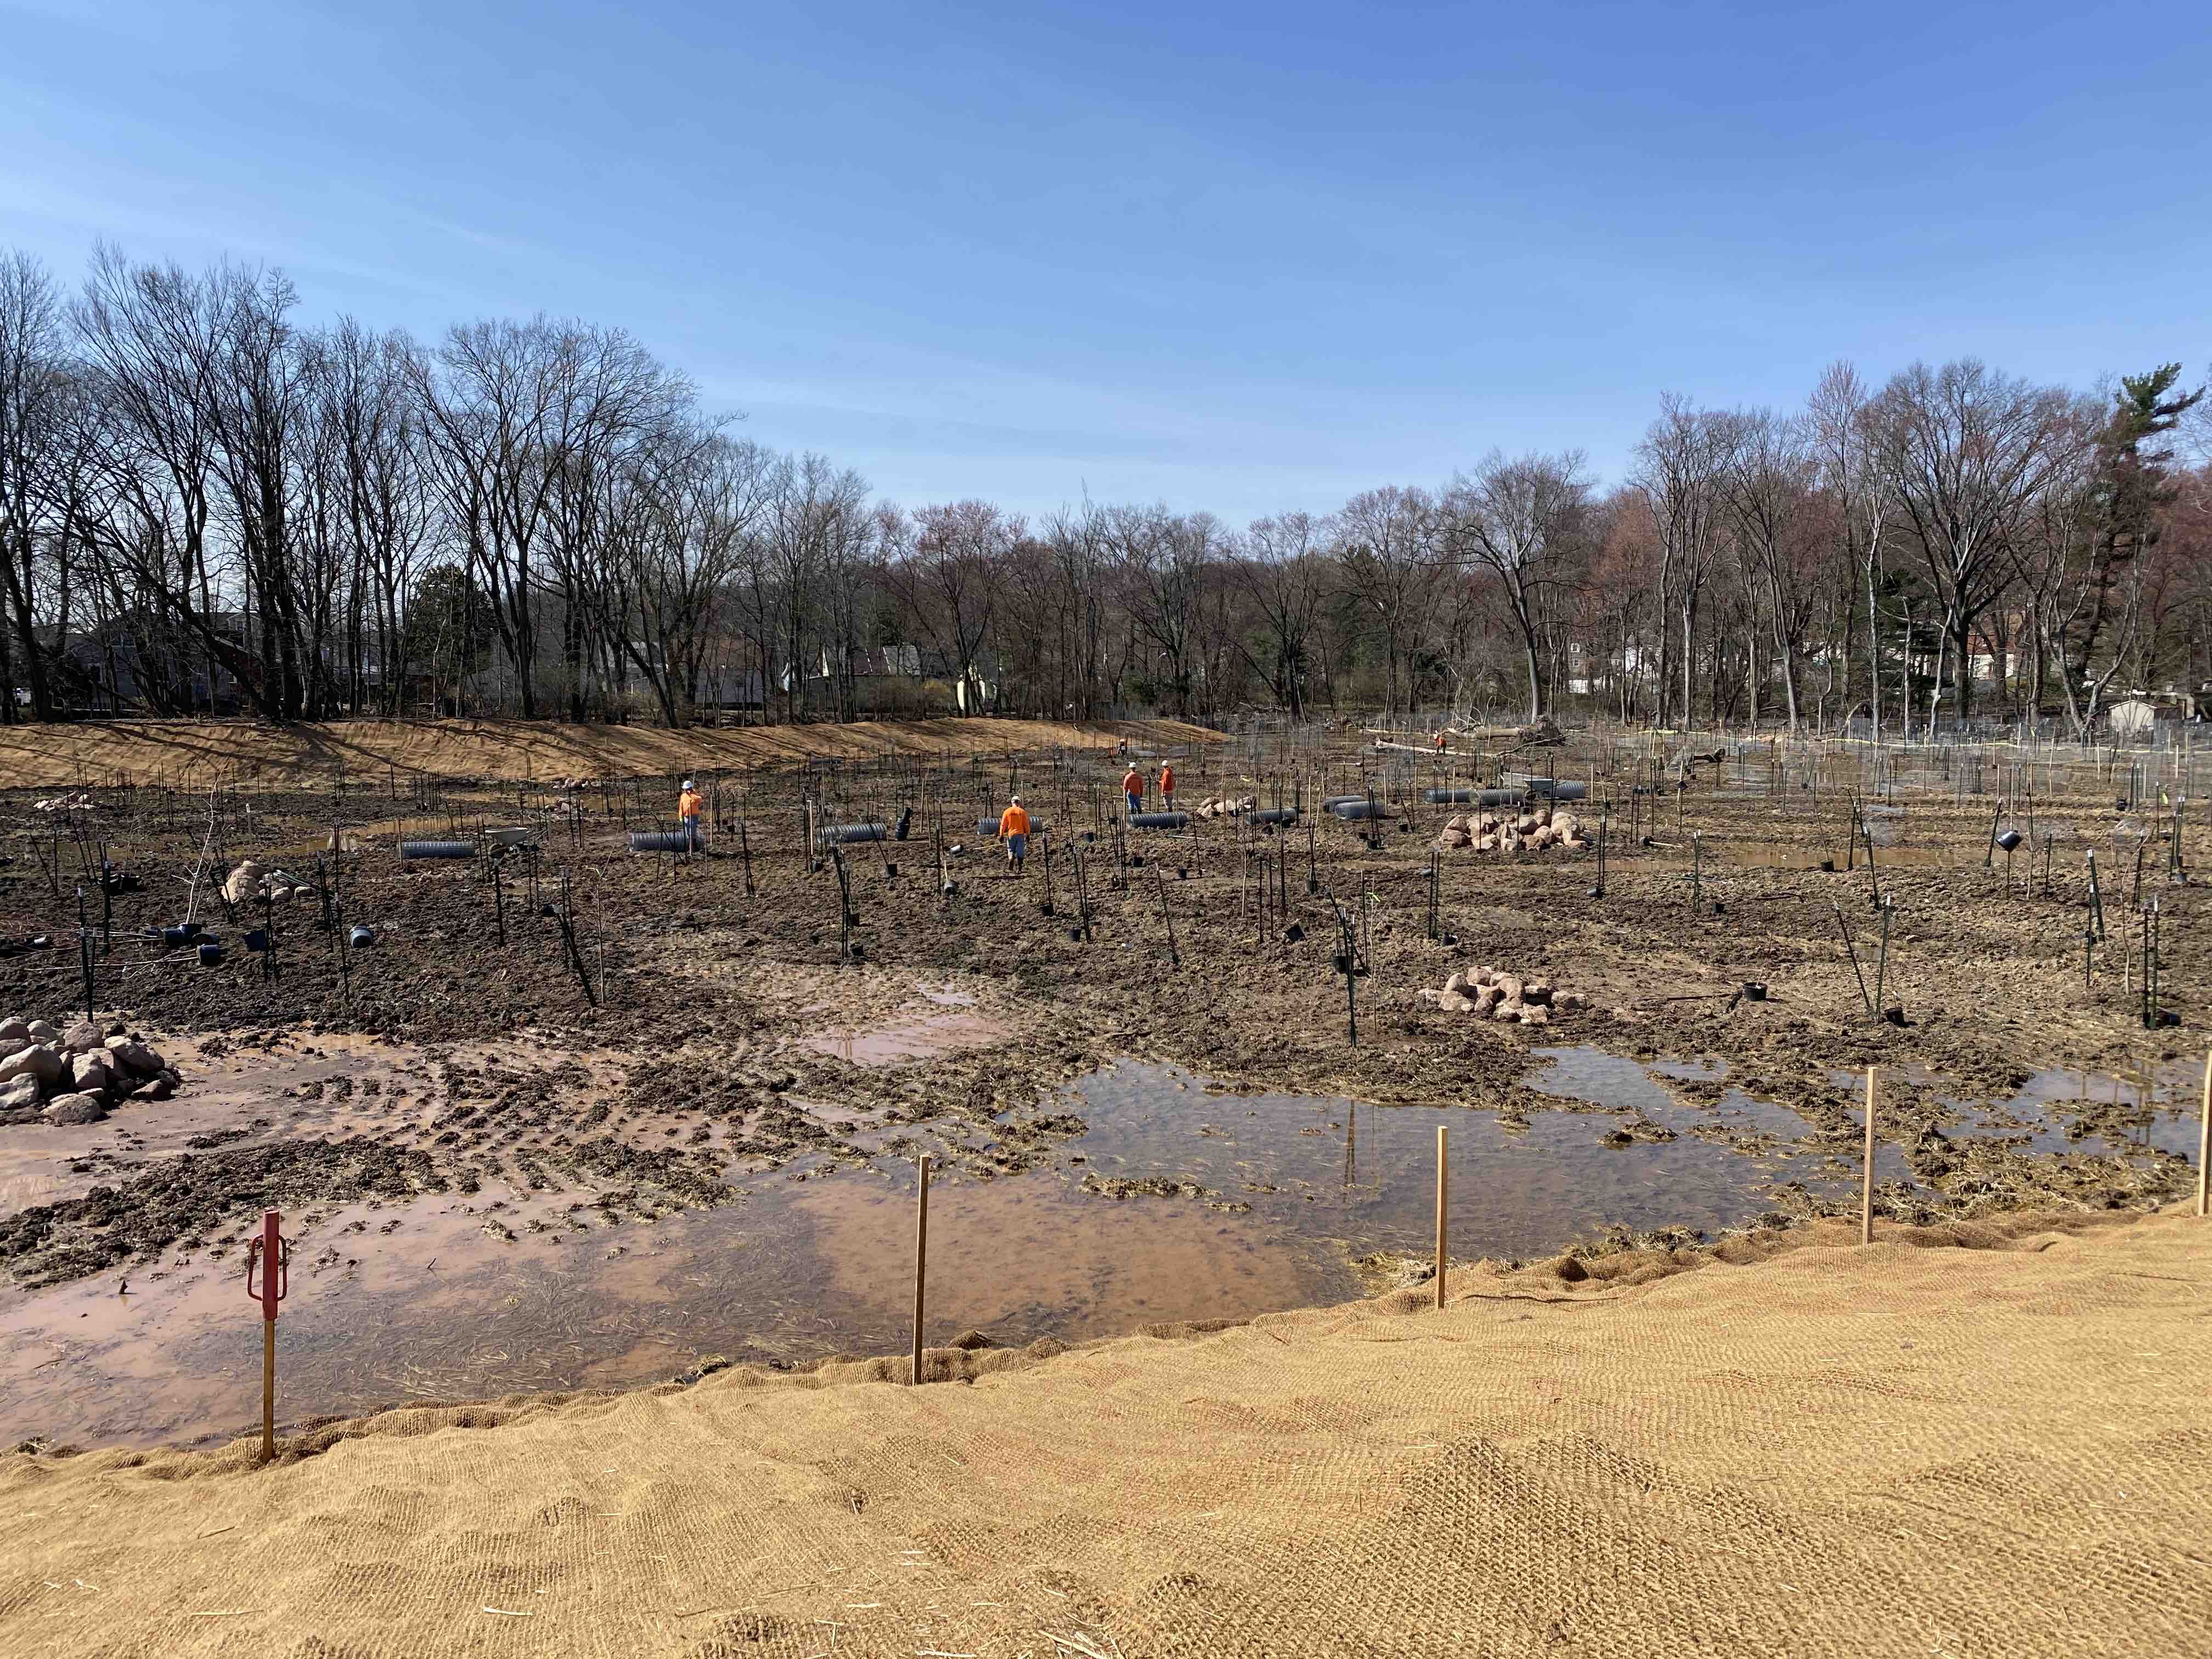 This green infrastructure project will re-establish the natural floodplain wetland and riparian plant communities.